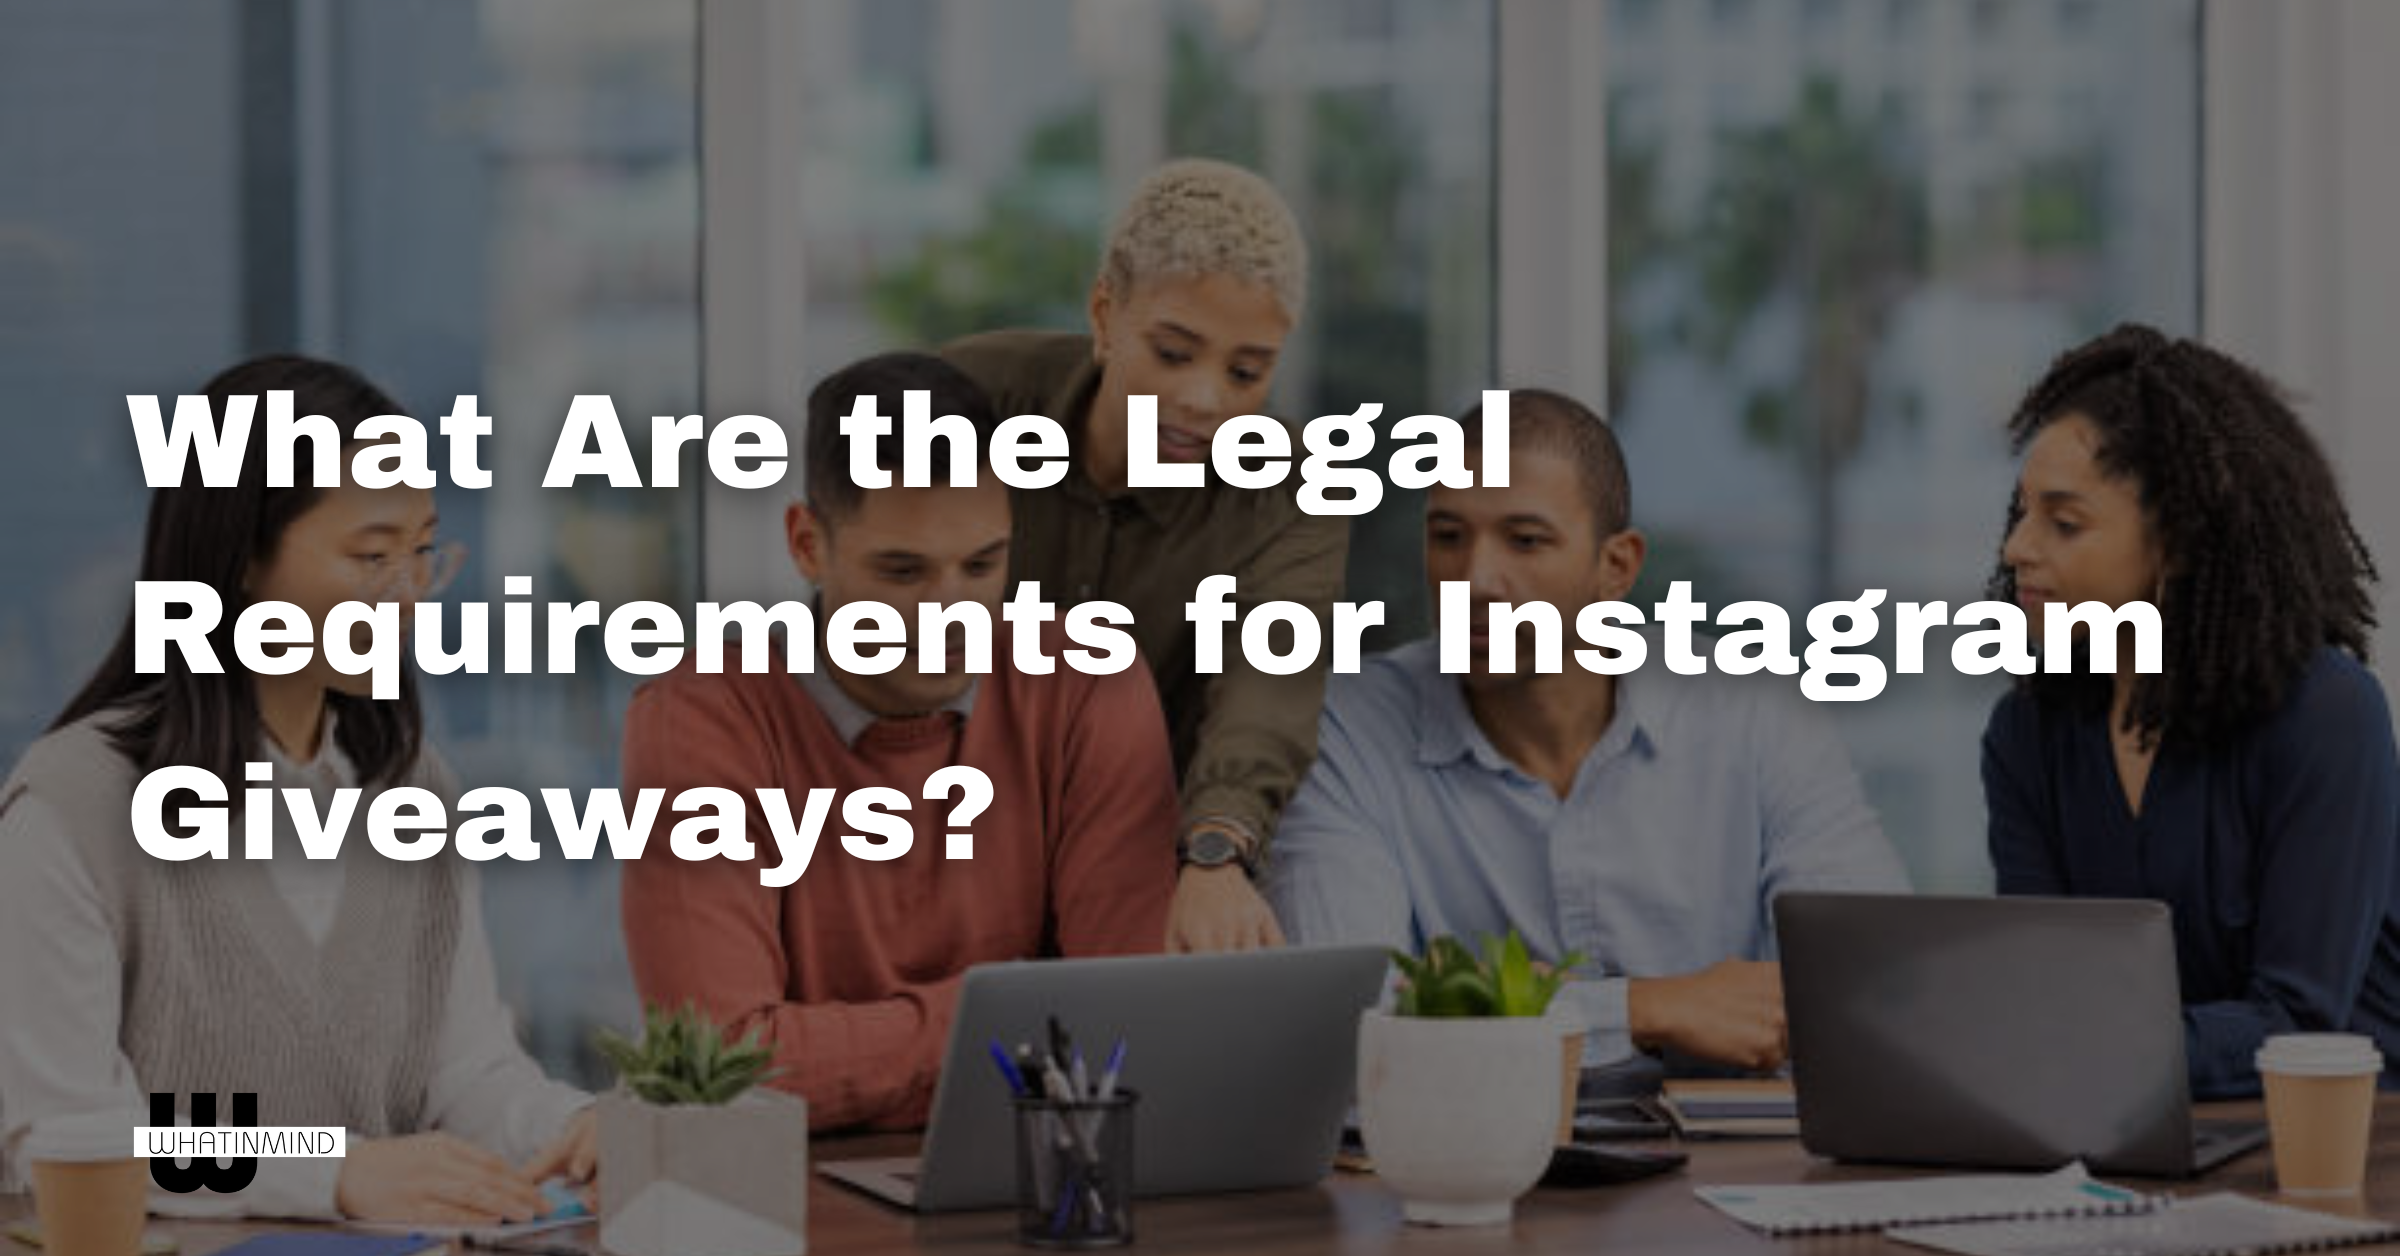 What Are the Legal Requirements for Instagram Giveaways